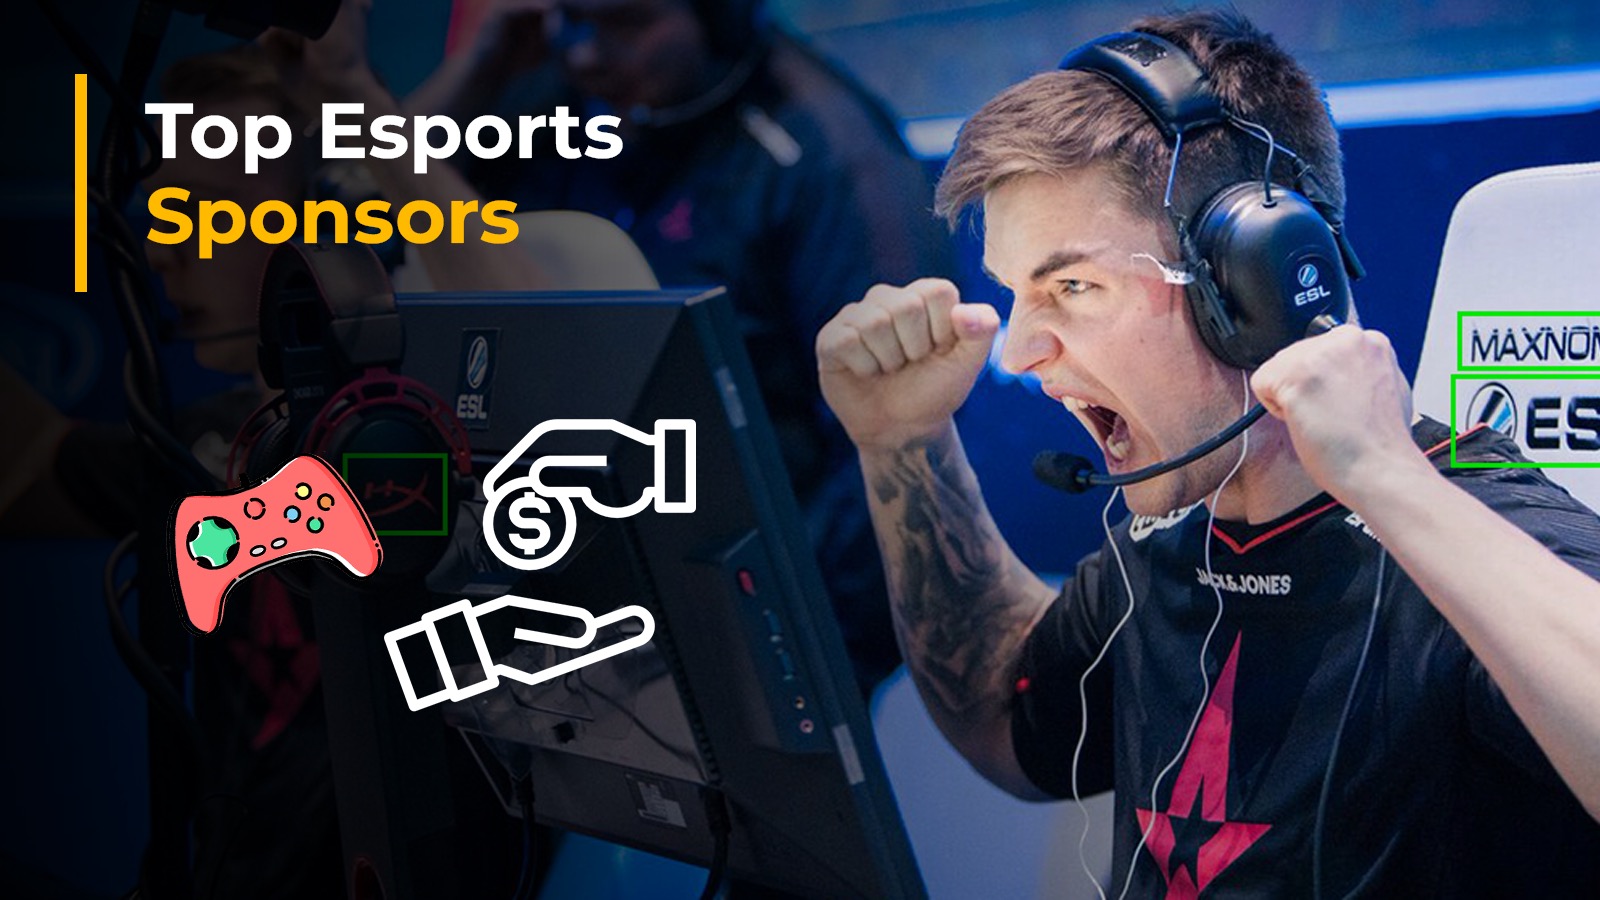 The Top Brands that Sponsor Esports